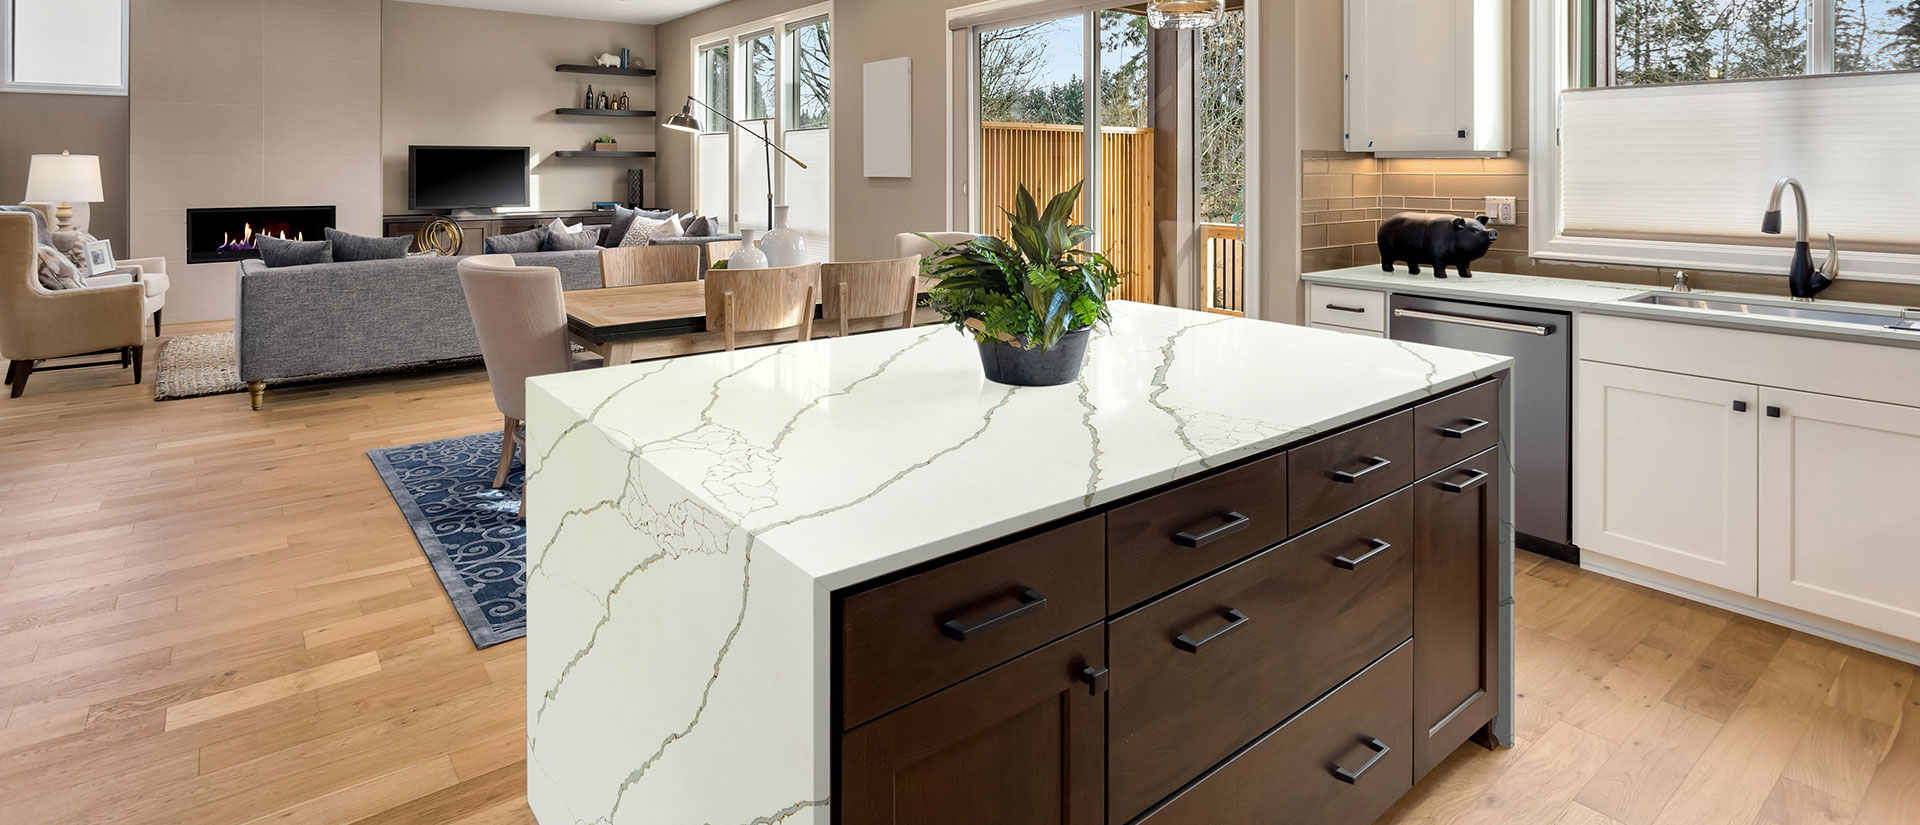 New Calacatta Laza Gold Quartz countertop in a glamorous and sophisticated kitchen